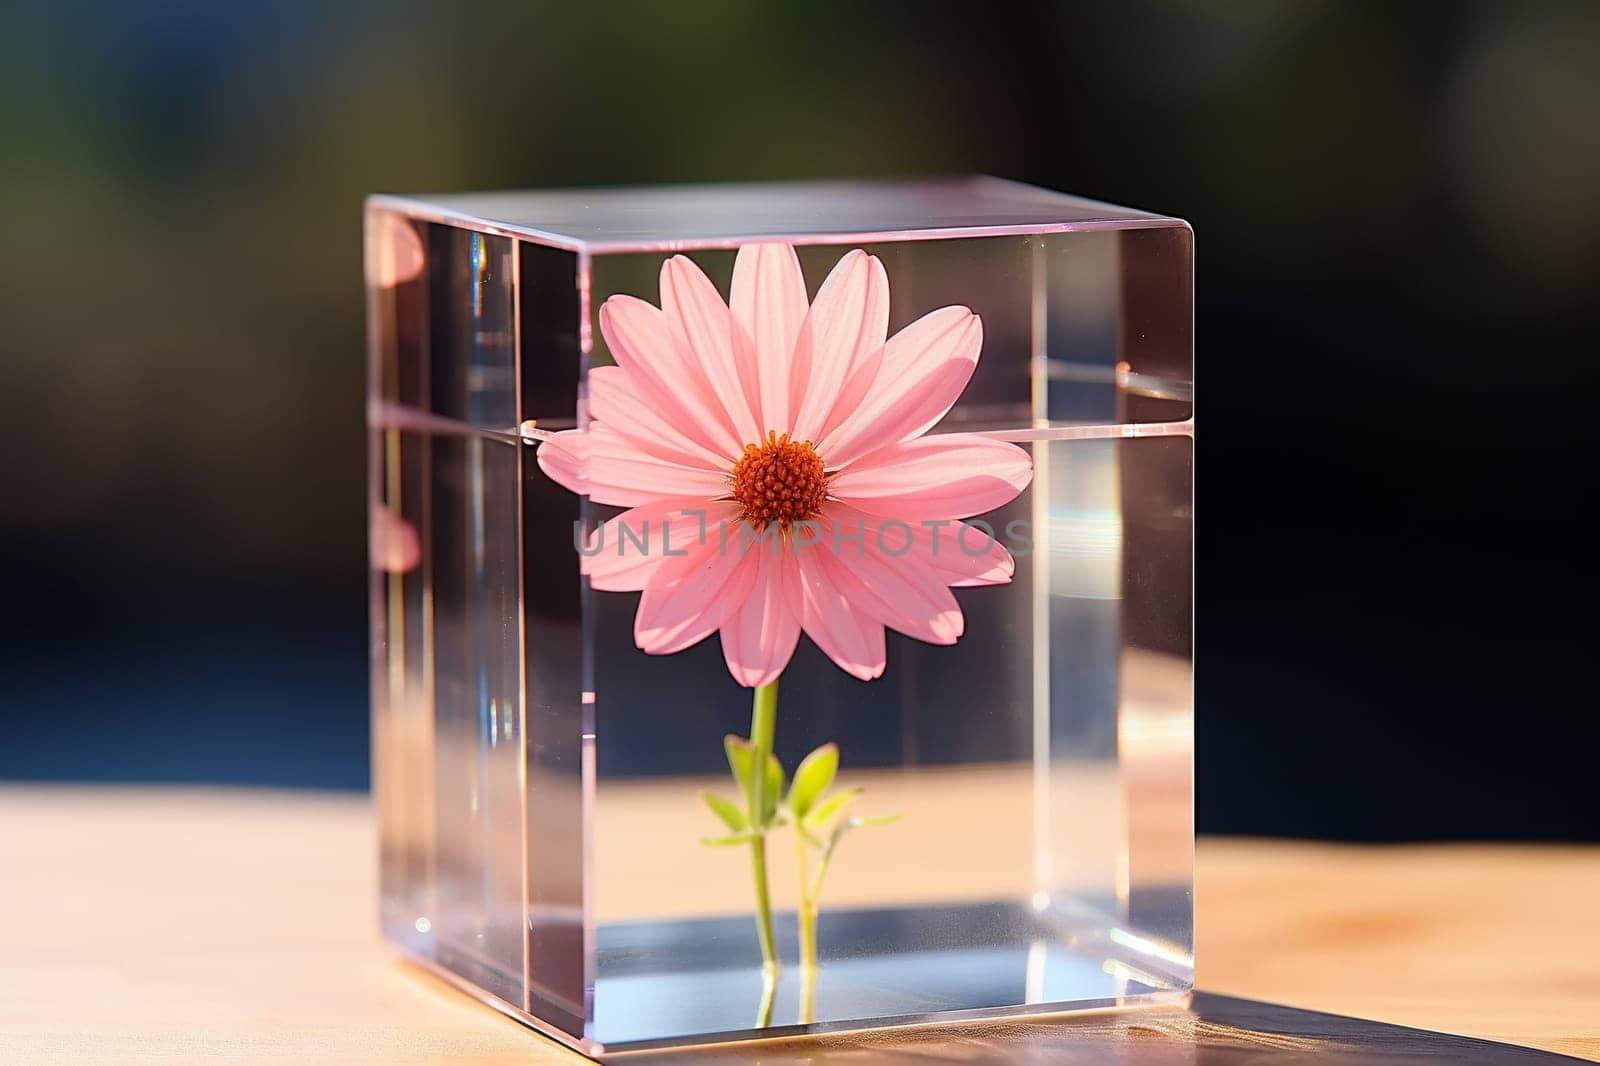 A flower in a glass cube on a blur background.